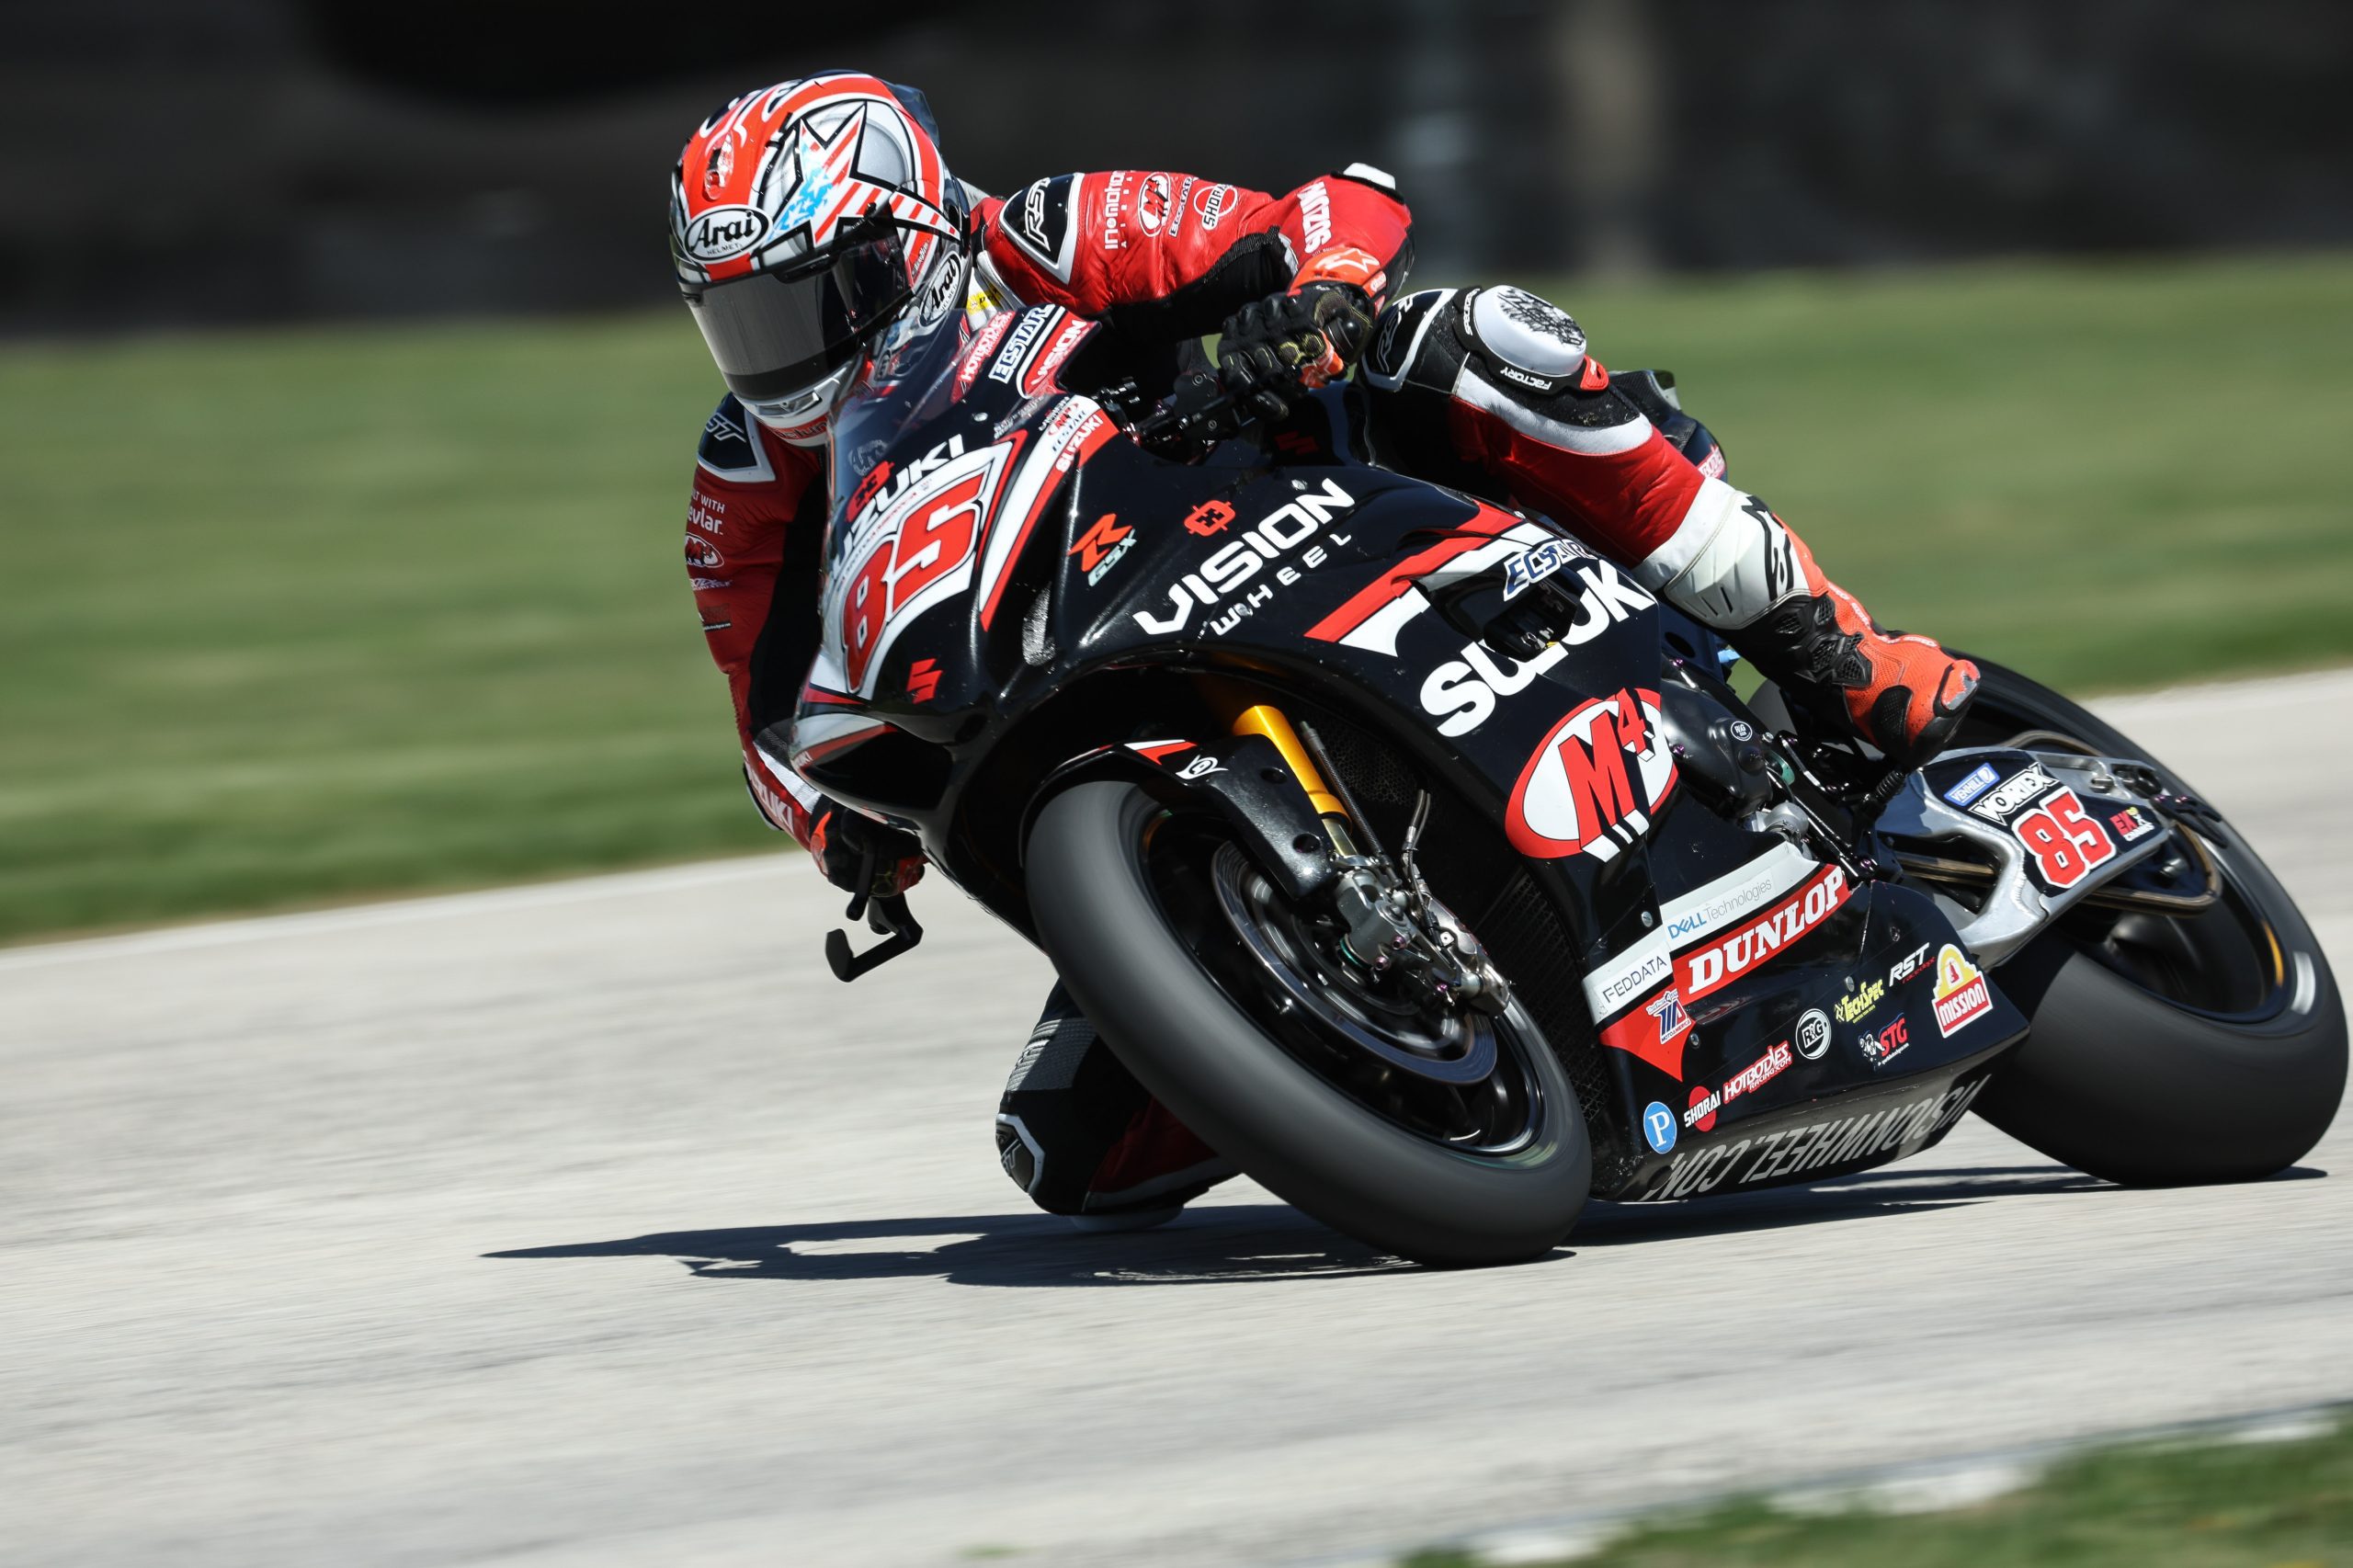 Jake Lewis To Fill In For Injured Supersport Rider Cory Ventura On Disrupt Racing GSX-R750